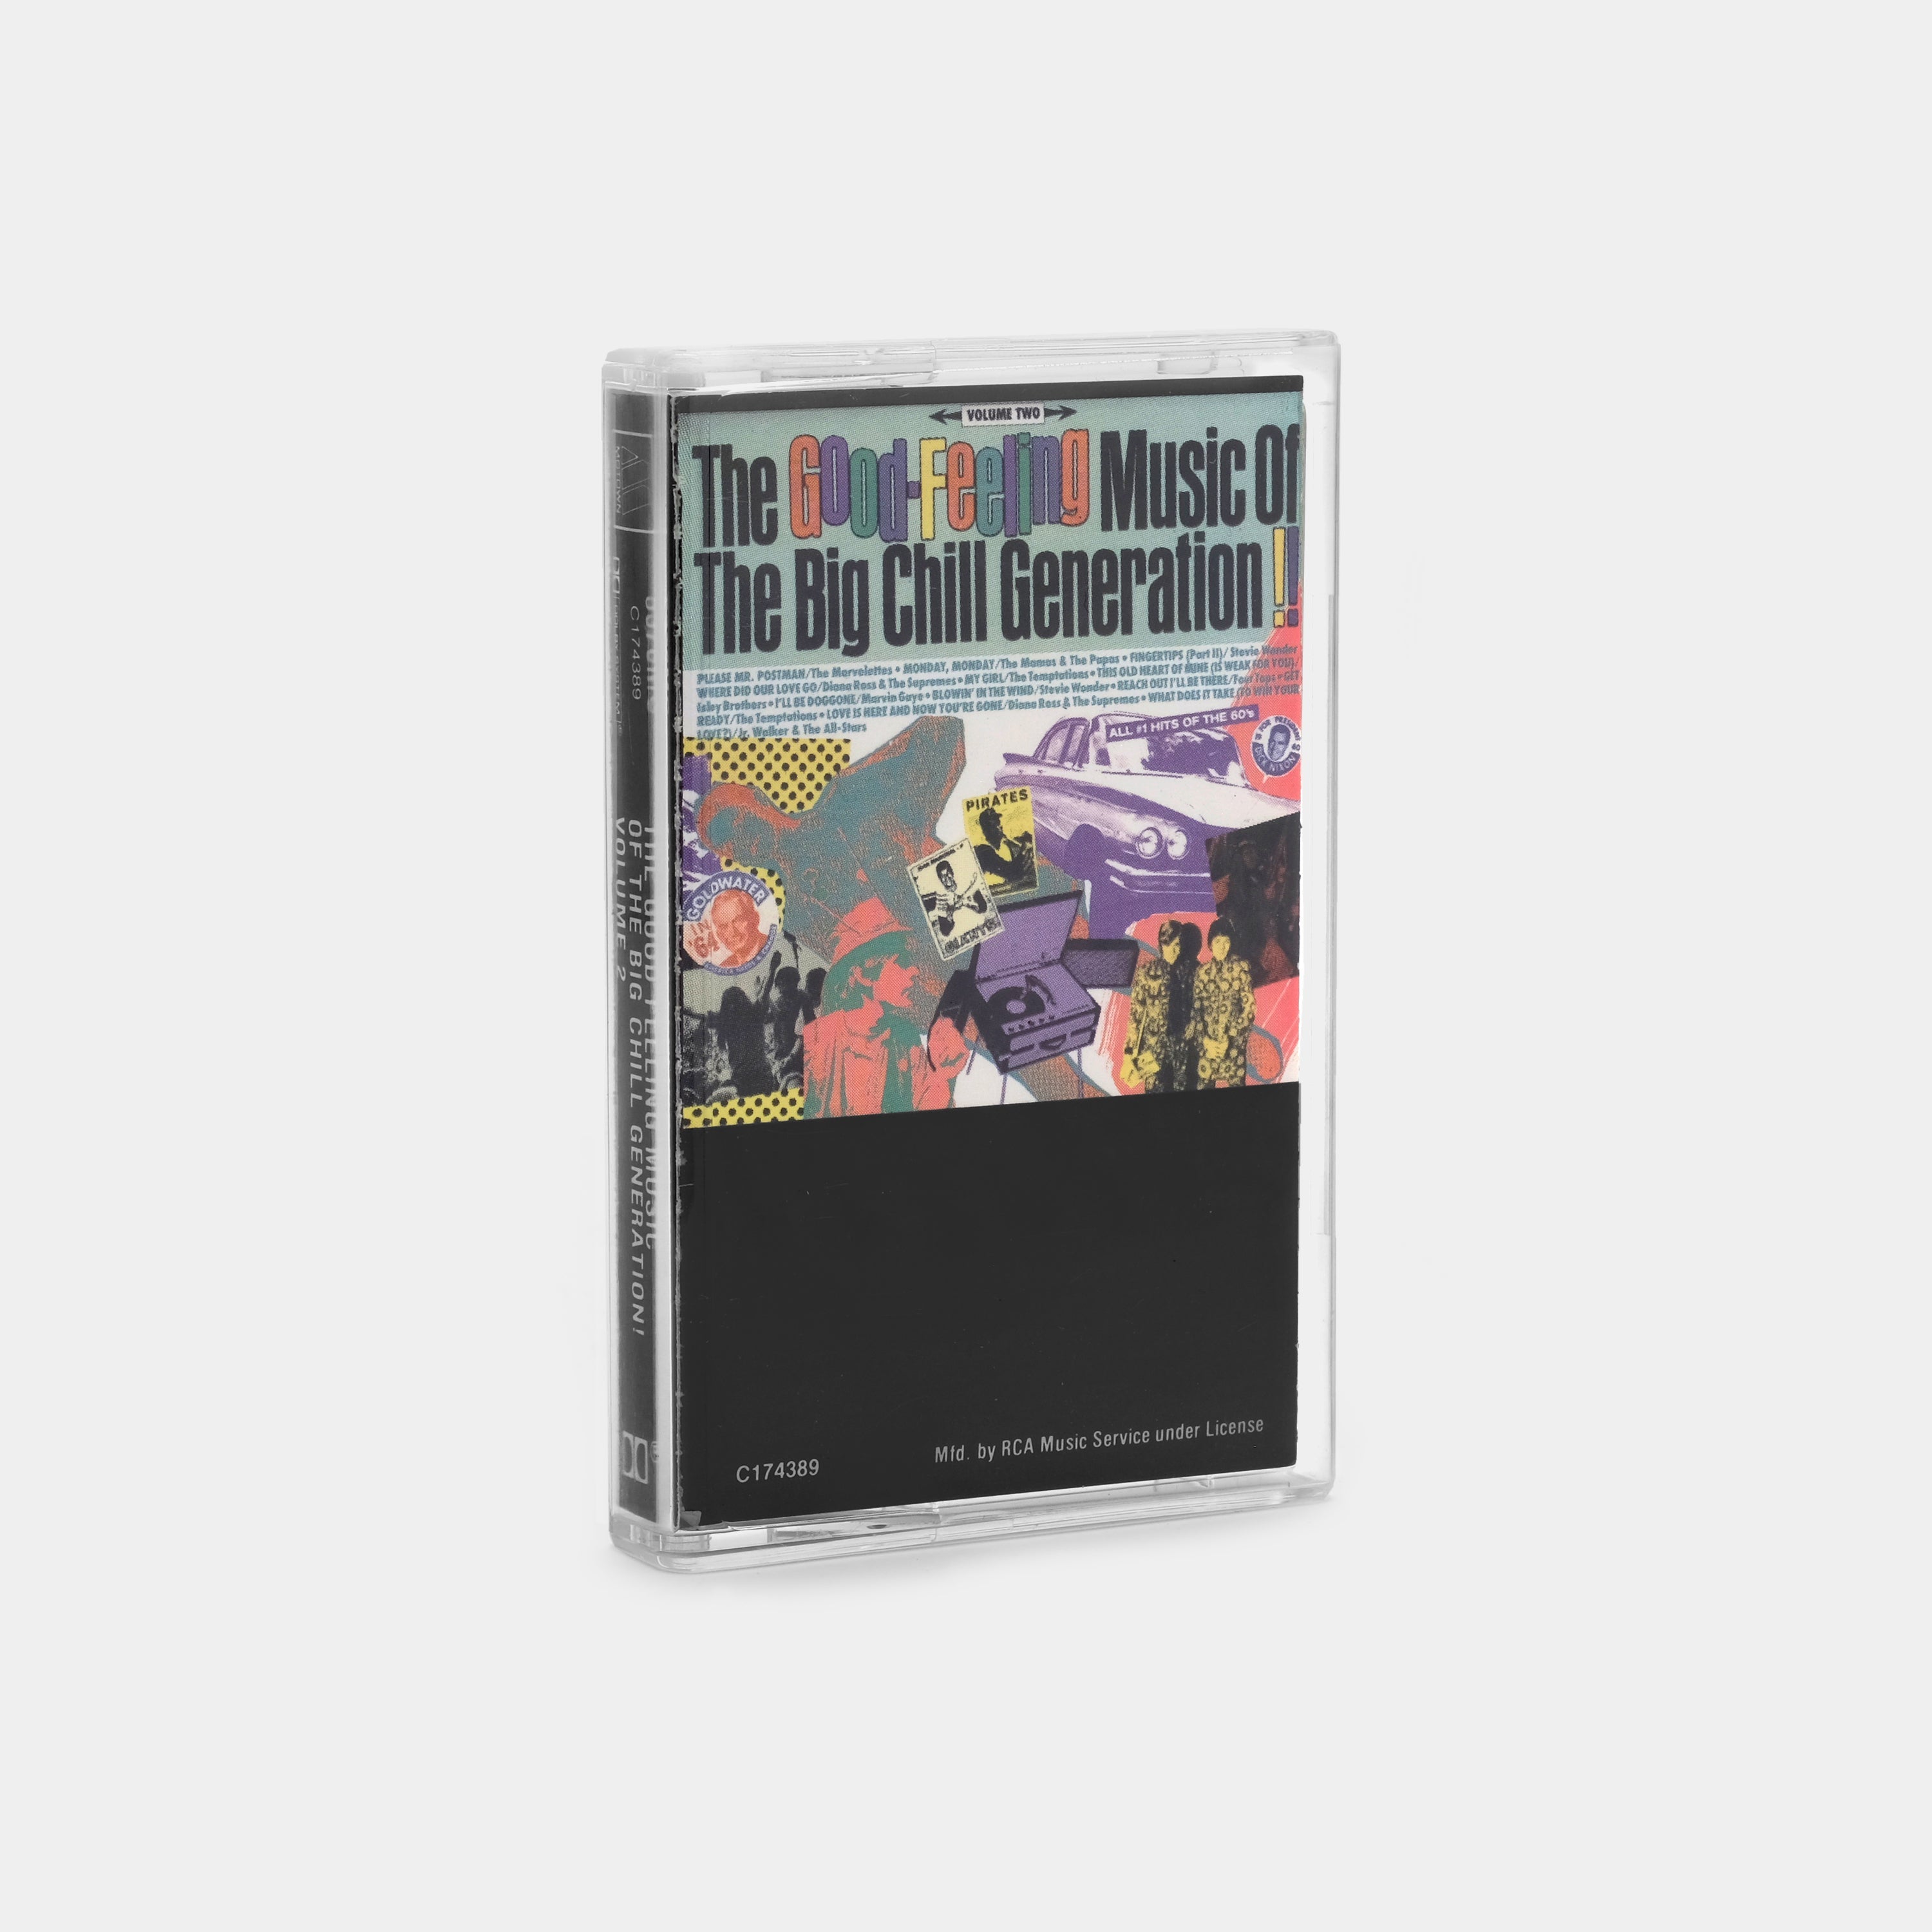 The Good-Feeling Music of the Big Chill Generation Volume 2 Cassette Tape